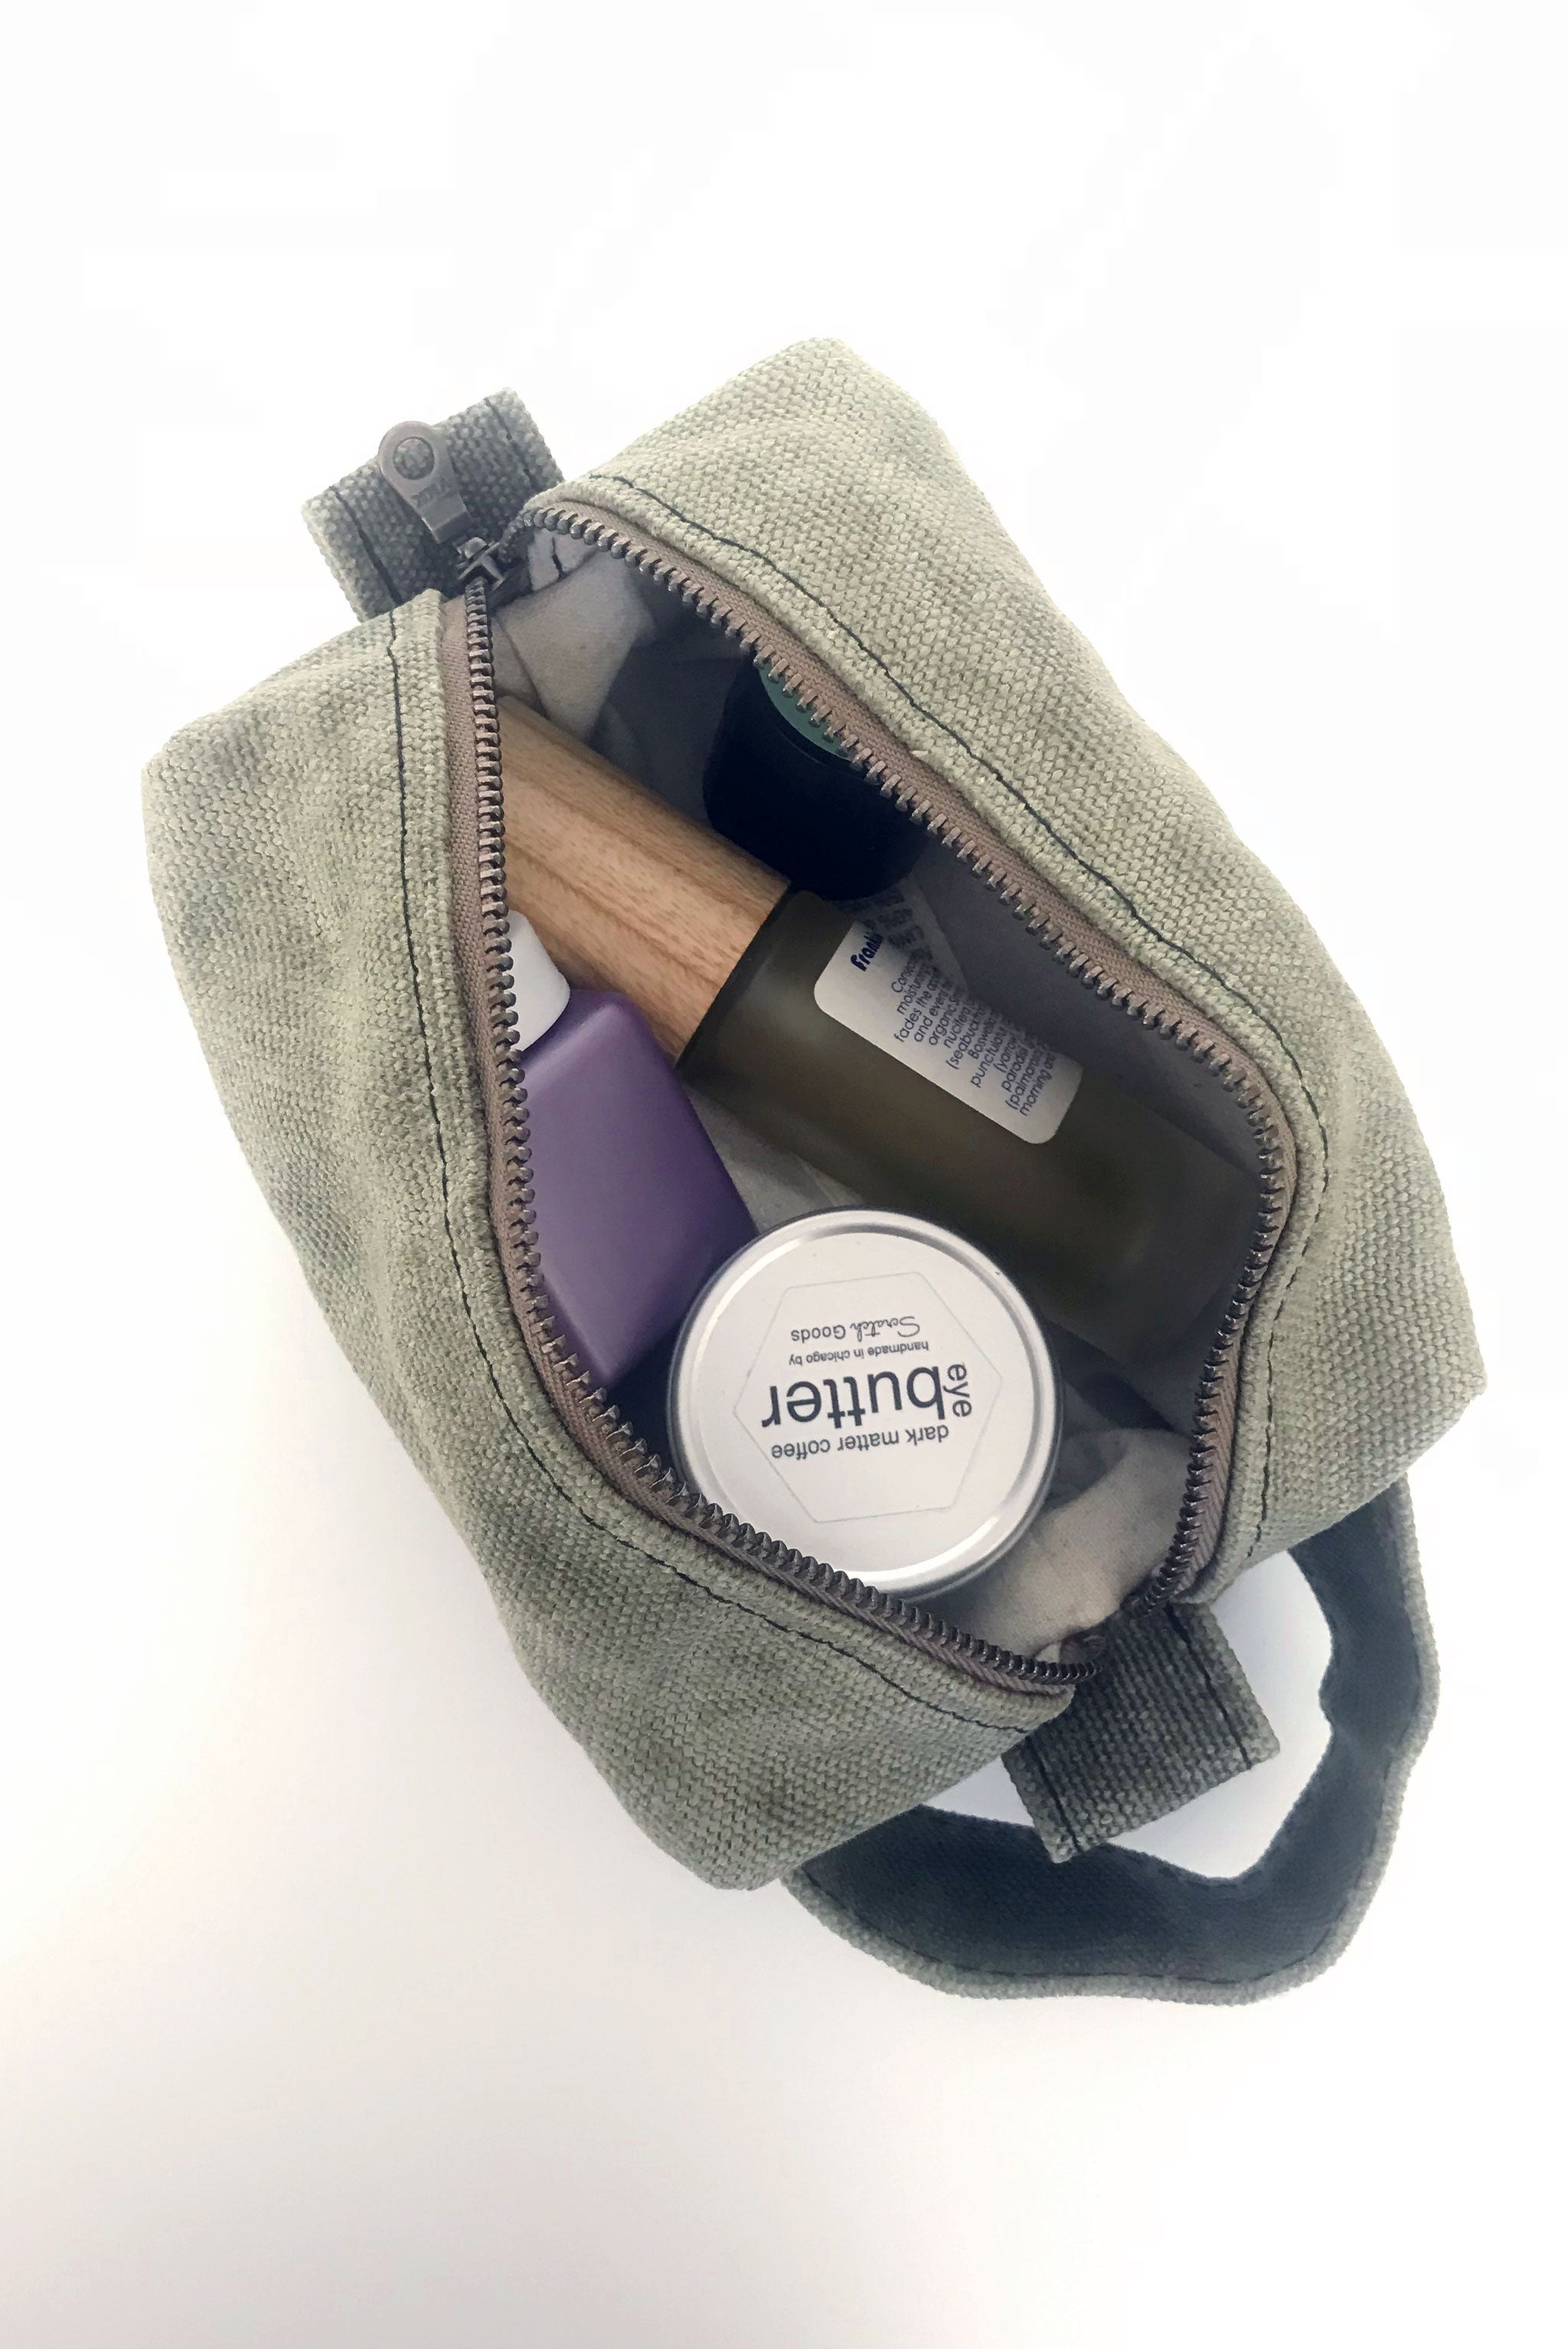 small waxed canvas toiletry bag with handle and brass zipper. The bag is open and contains small toiletries inside. The bag is sage green. 